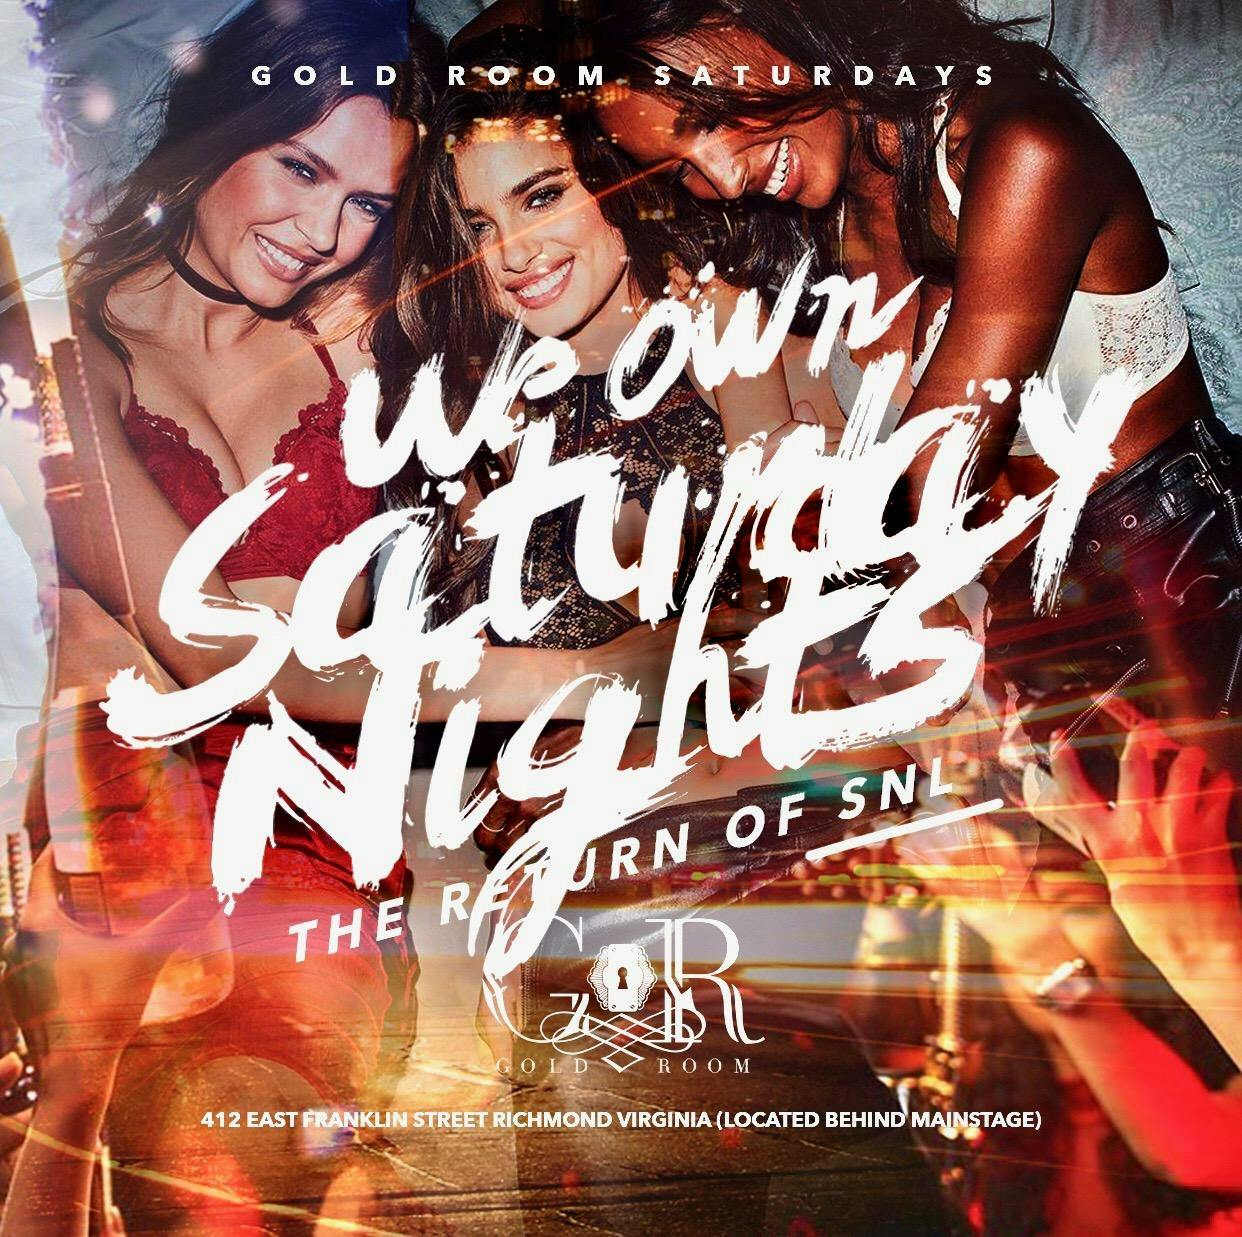 Saturday Night Live at Gold Room [Guestlist]